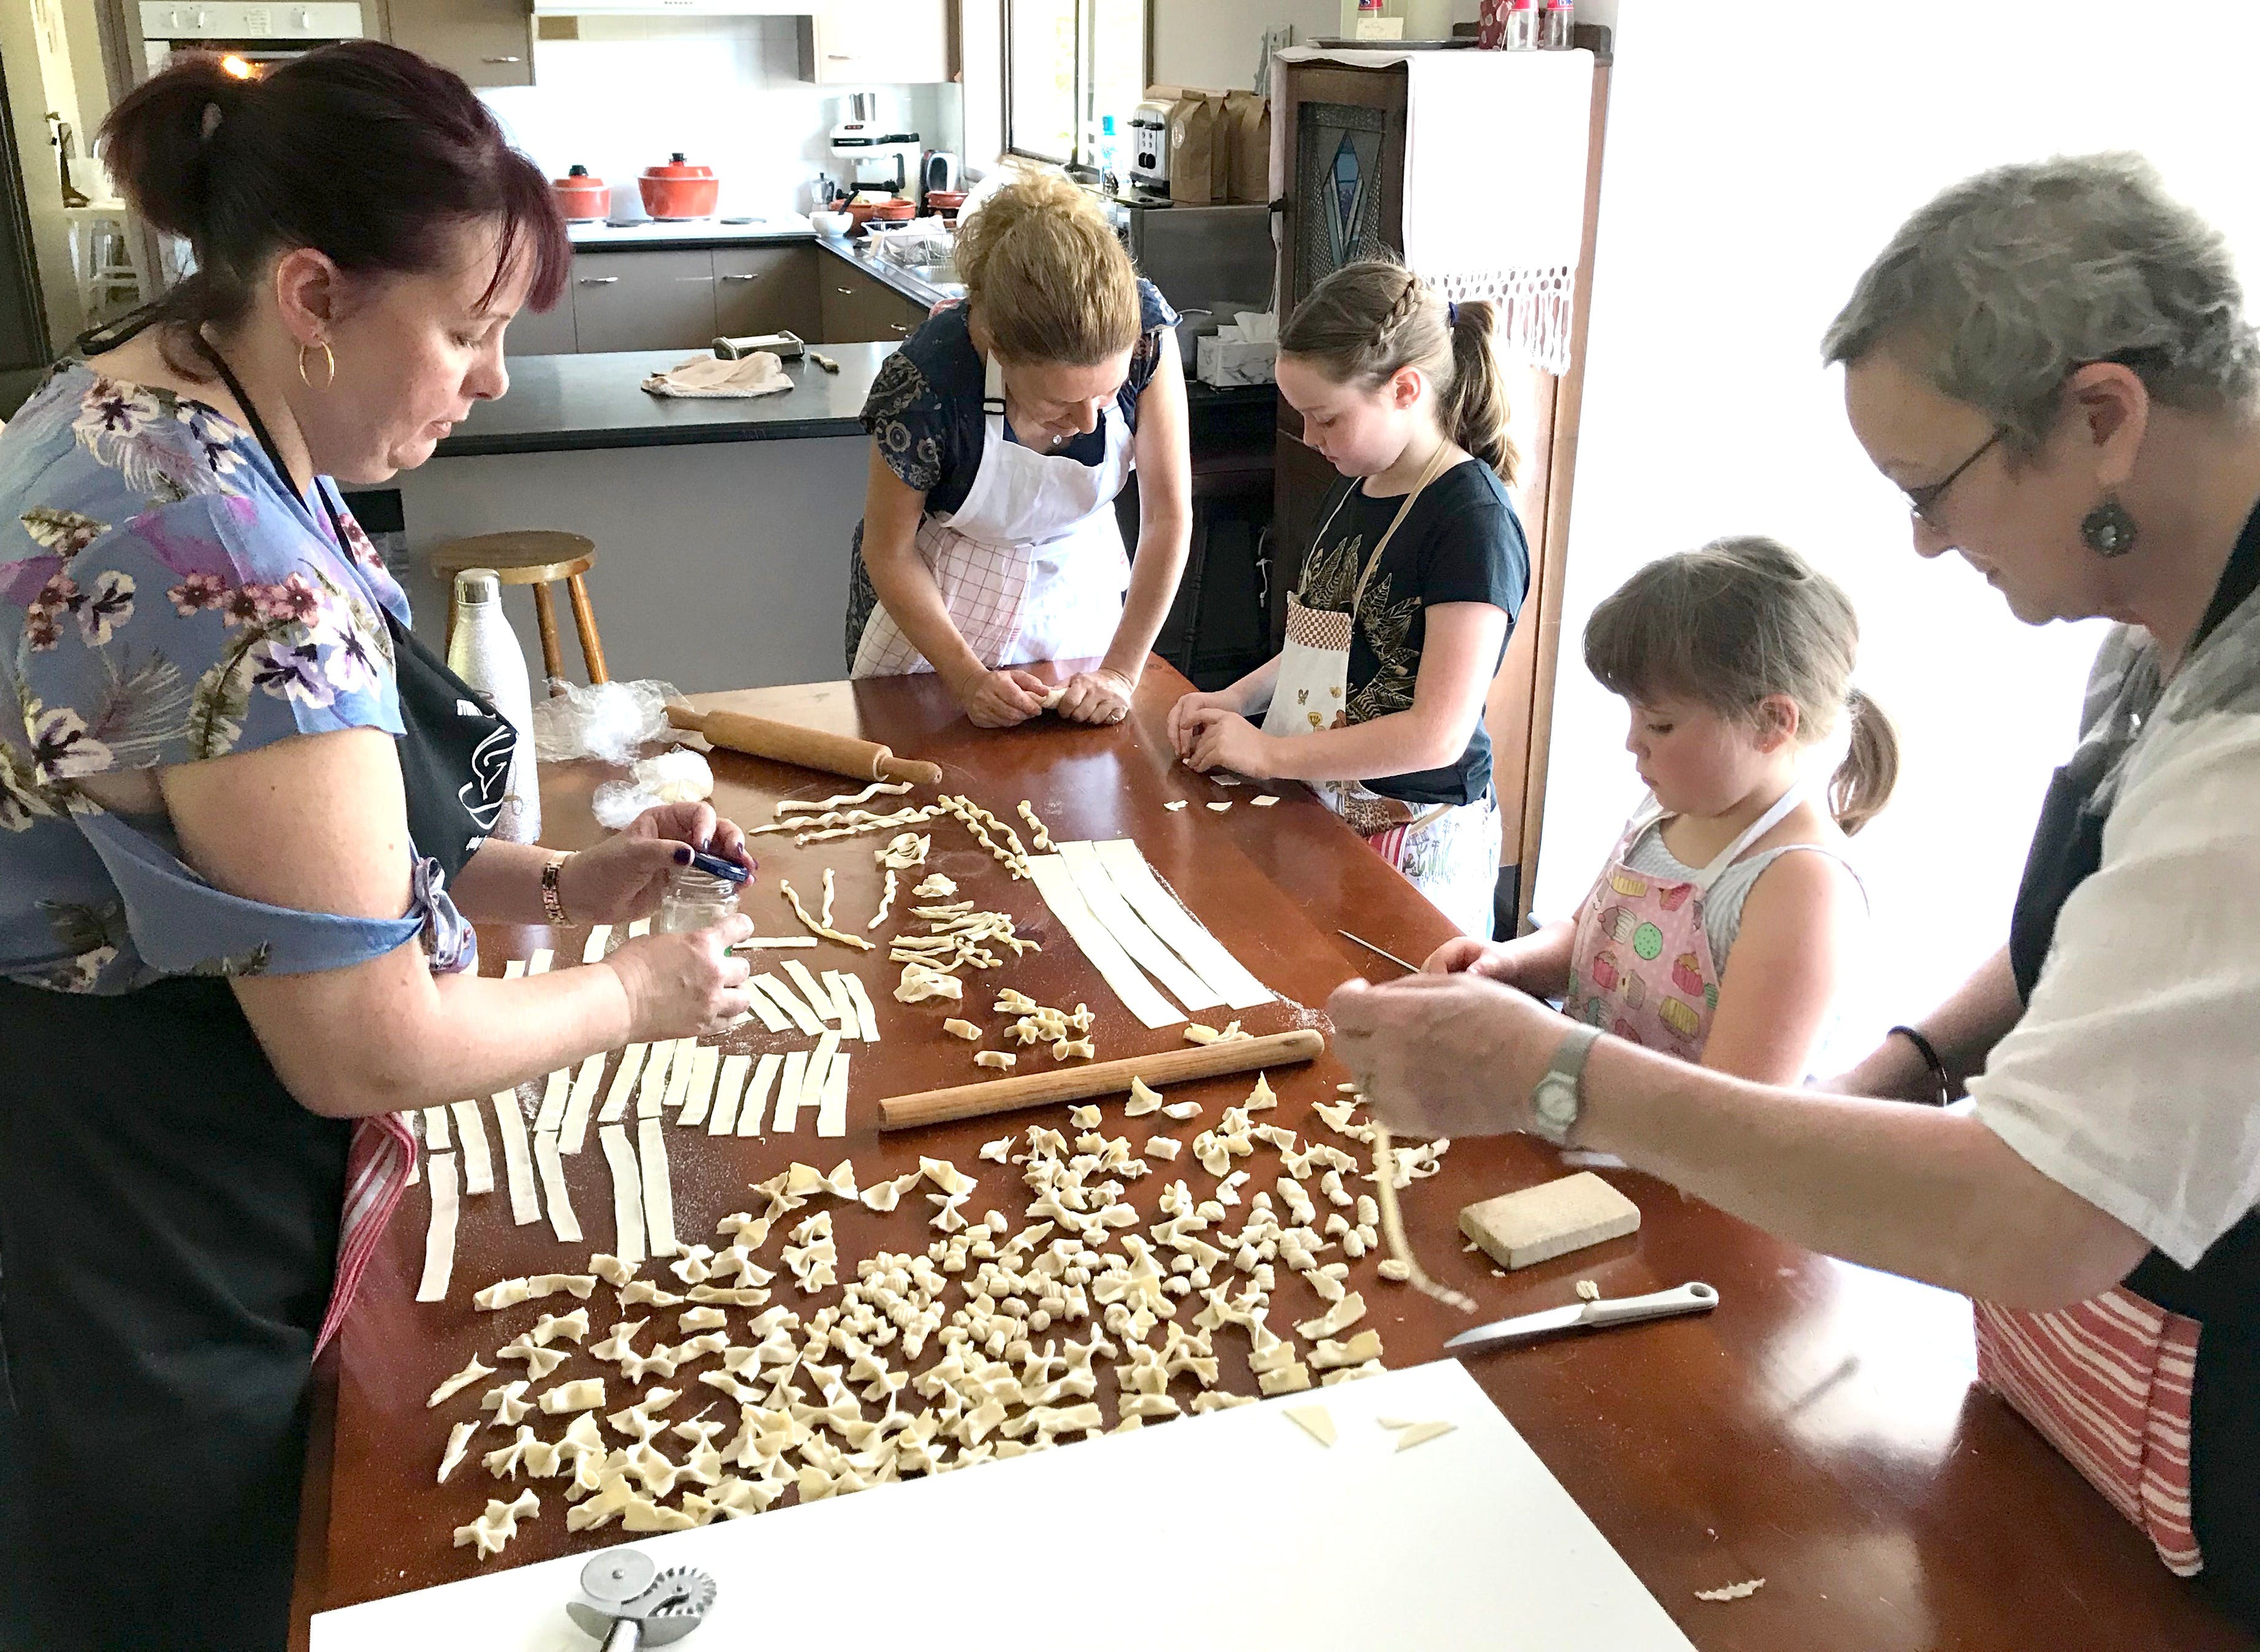 Kids Pasta Making Class - hands on fun at your house - C Tourism